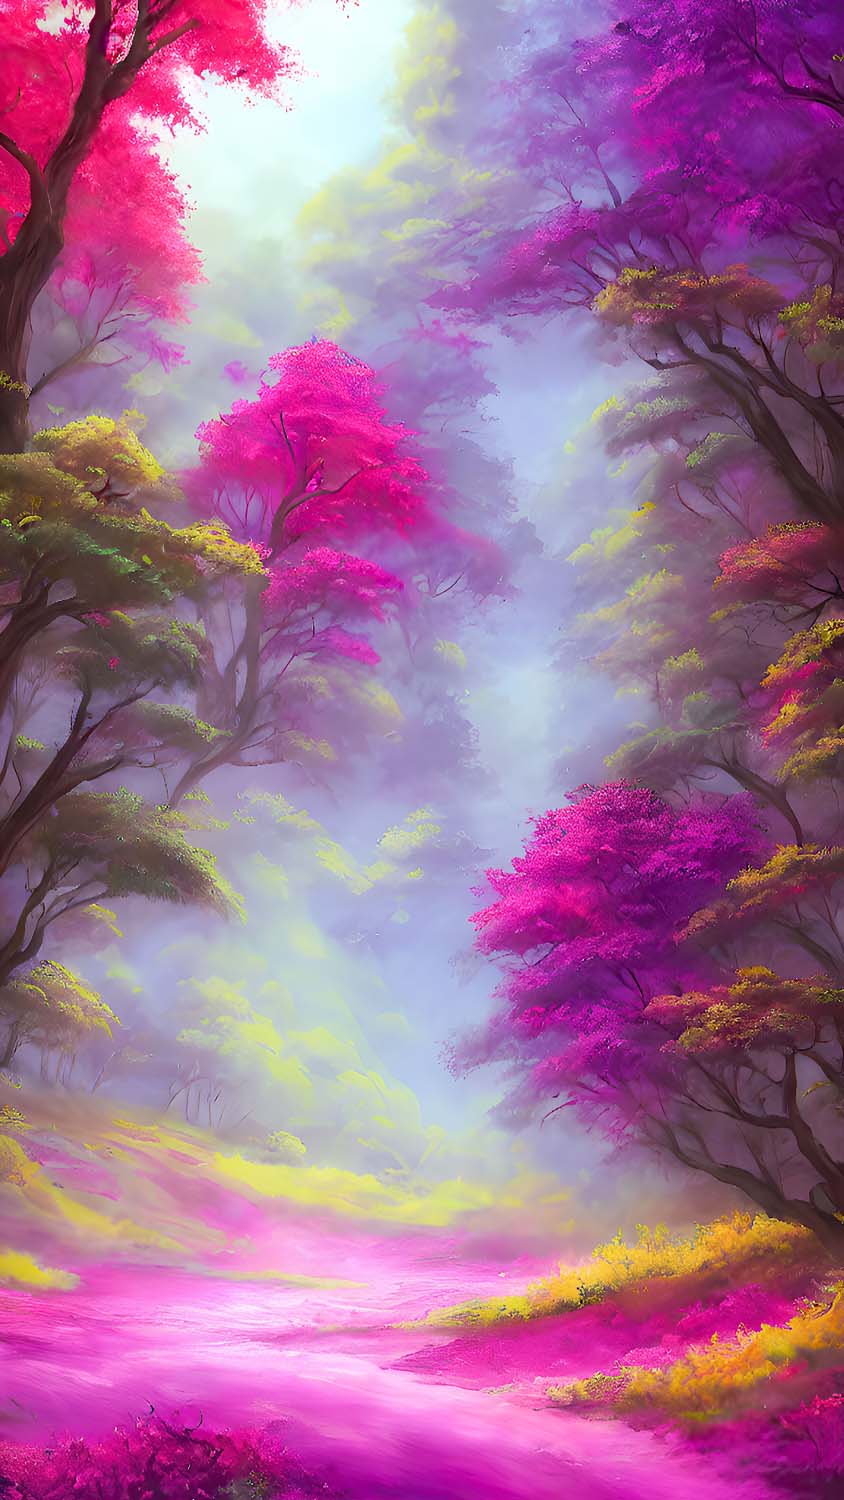 Forest Scenery Painting IPhone Wallpaper HD - IPhone Wallpapers : iPhone  Wallpapers